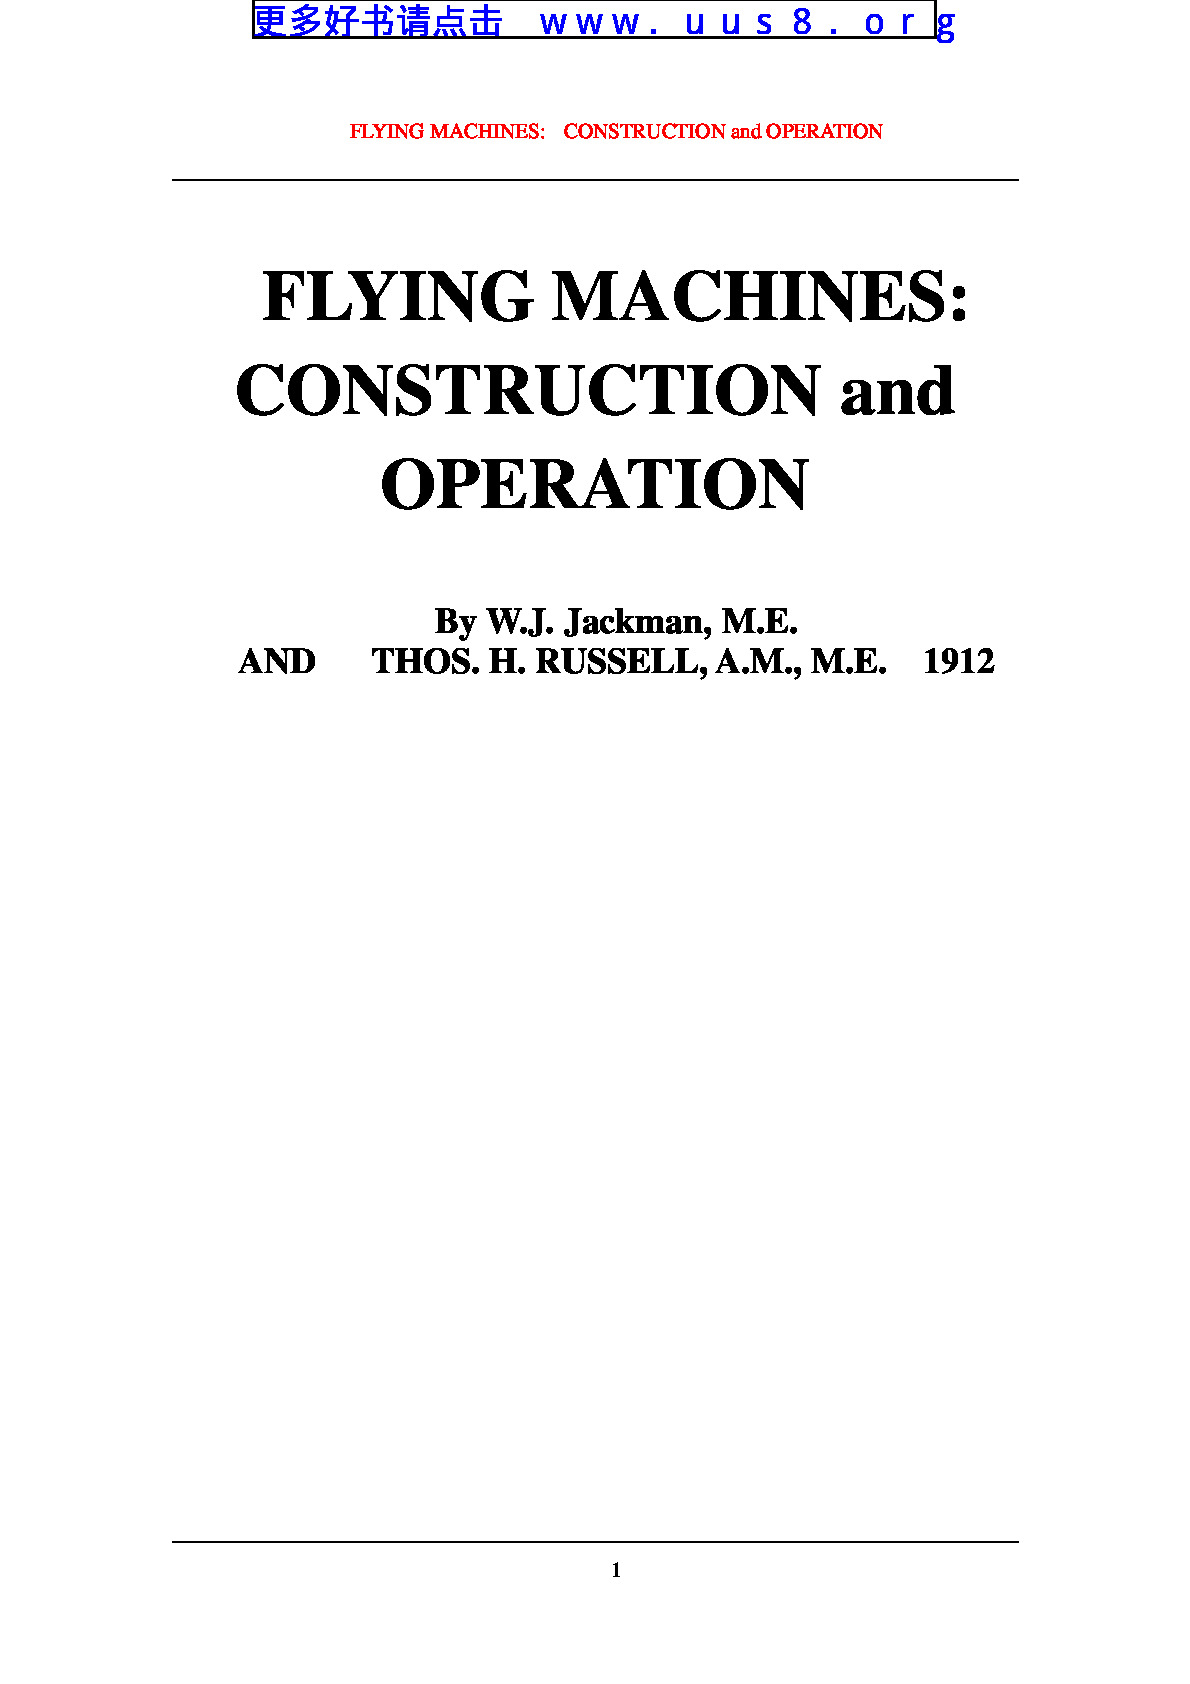 FLYING_MACHINES-_CONSTRUCTION_and_OPERATION(飞行器：结构和原理)